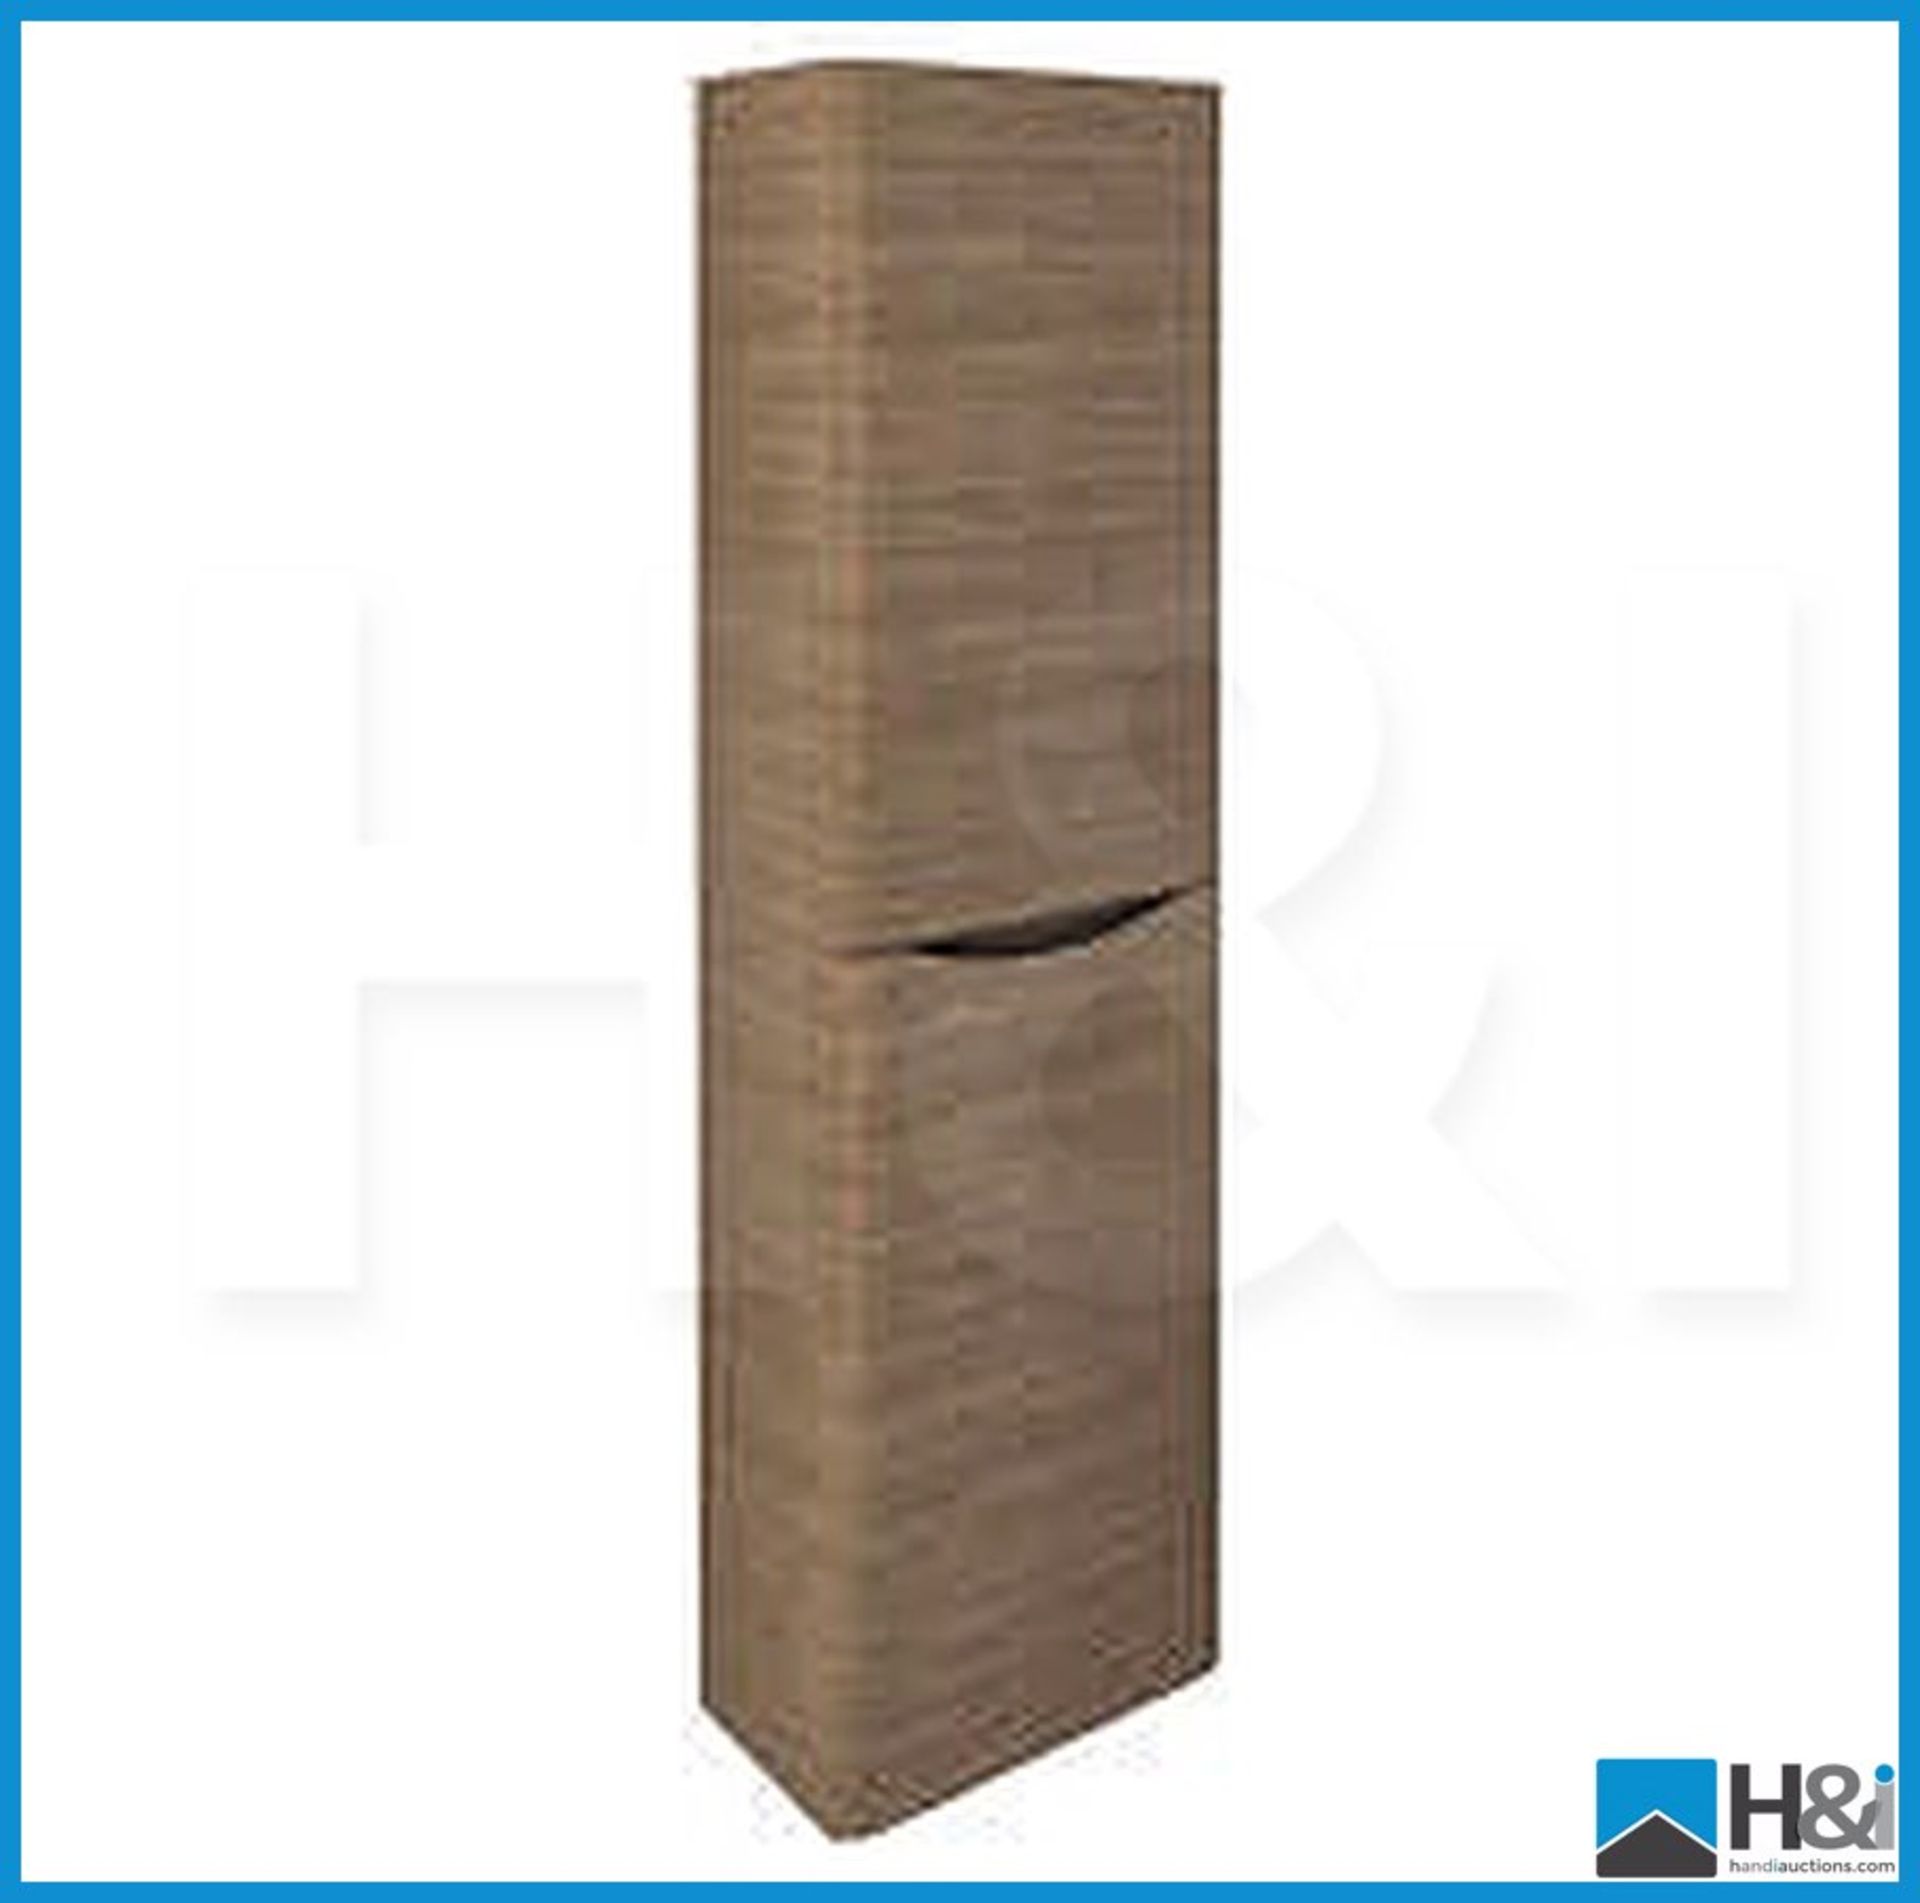 Designer Tavistock Ninety in Truffle finish 350 two door wall column. New and boxed. Suggested